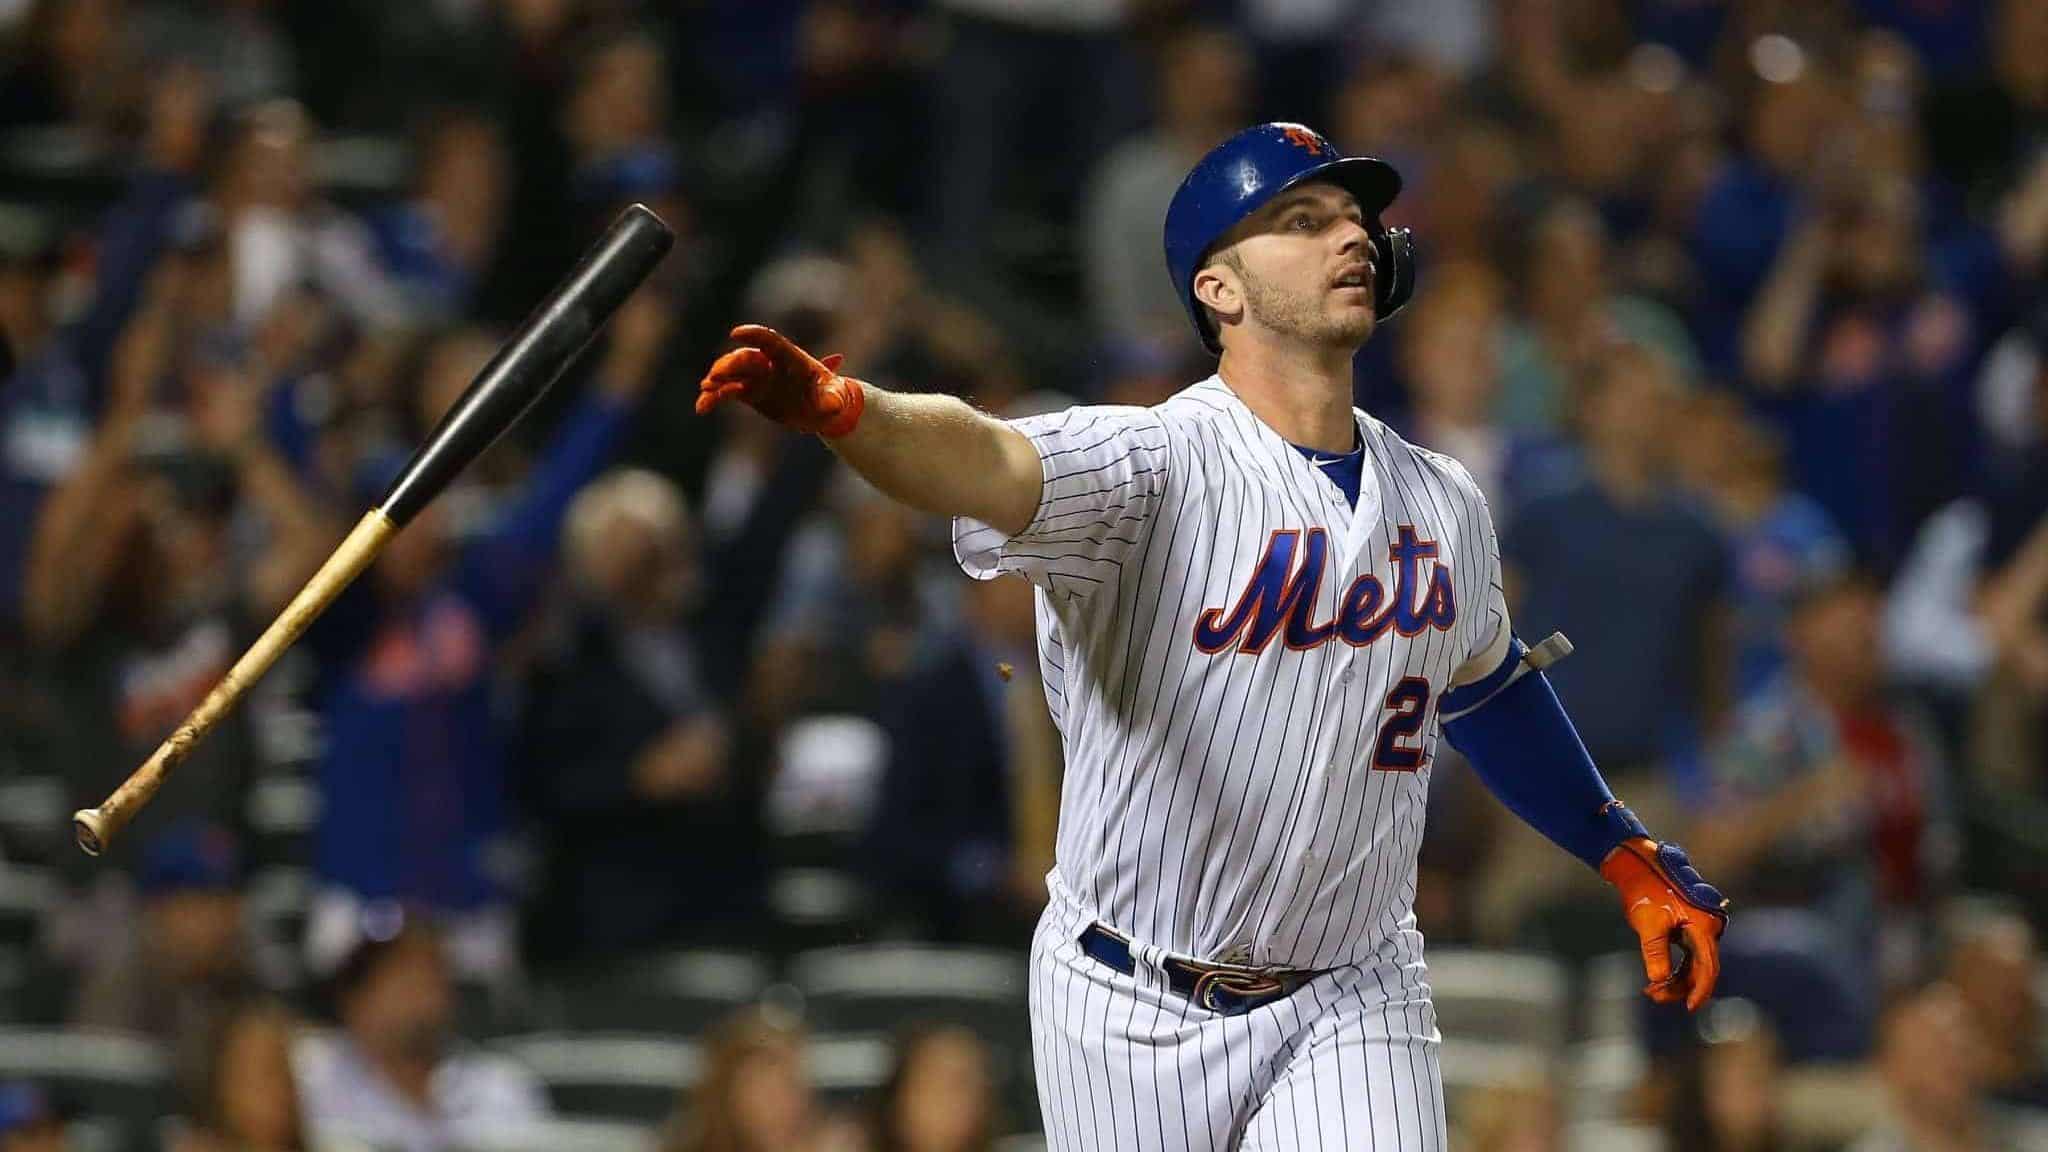 NEW YORK, NY - AUGUST 27: Pete Alonso #20 of the New York Mets flips his bat after hitting a home run against the Chicago Cubs during the fourth inning of a game at Citi Field on August 27, 2019 in New York City. The home run is Alonso's 42nd of the season, breaking the previous franchise record.